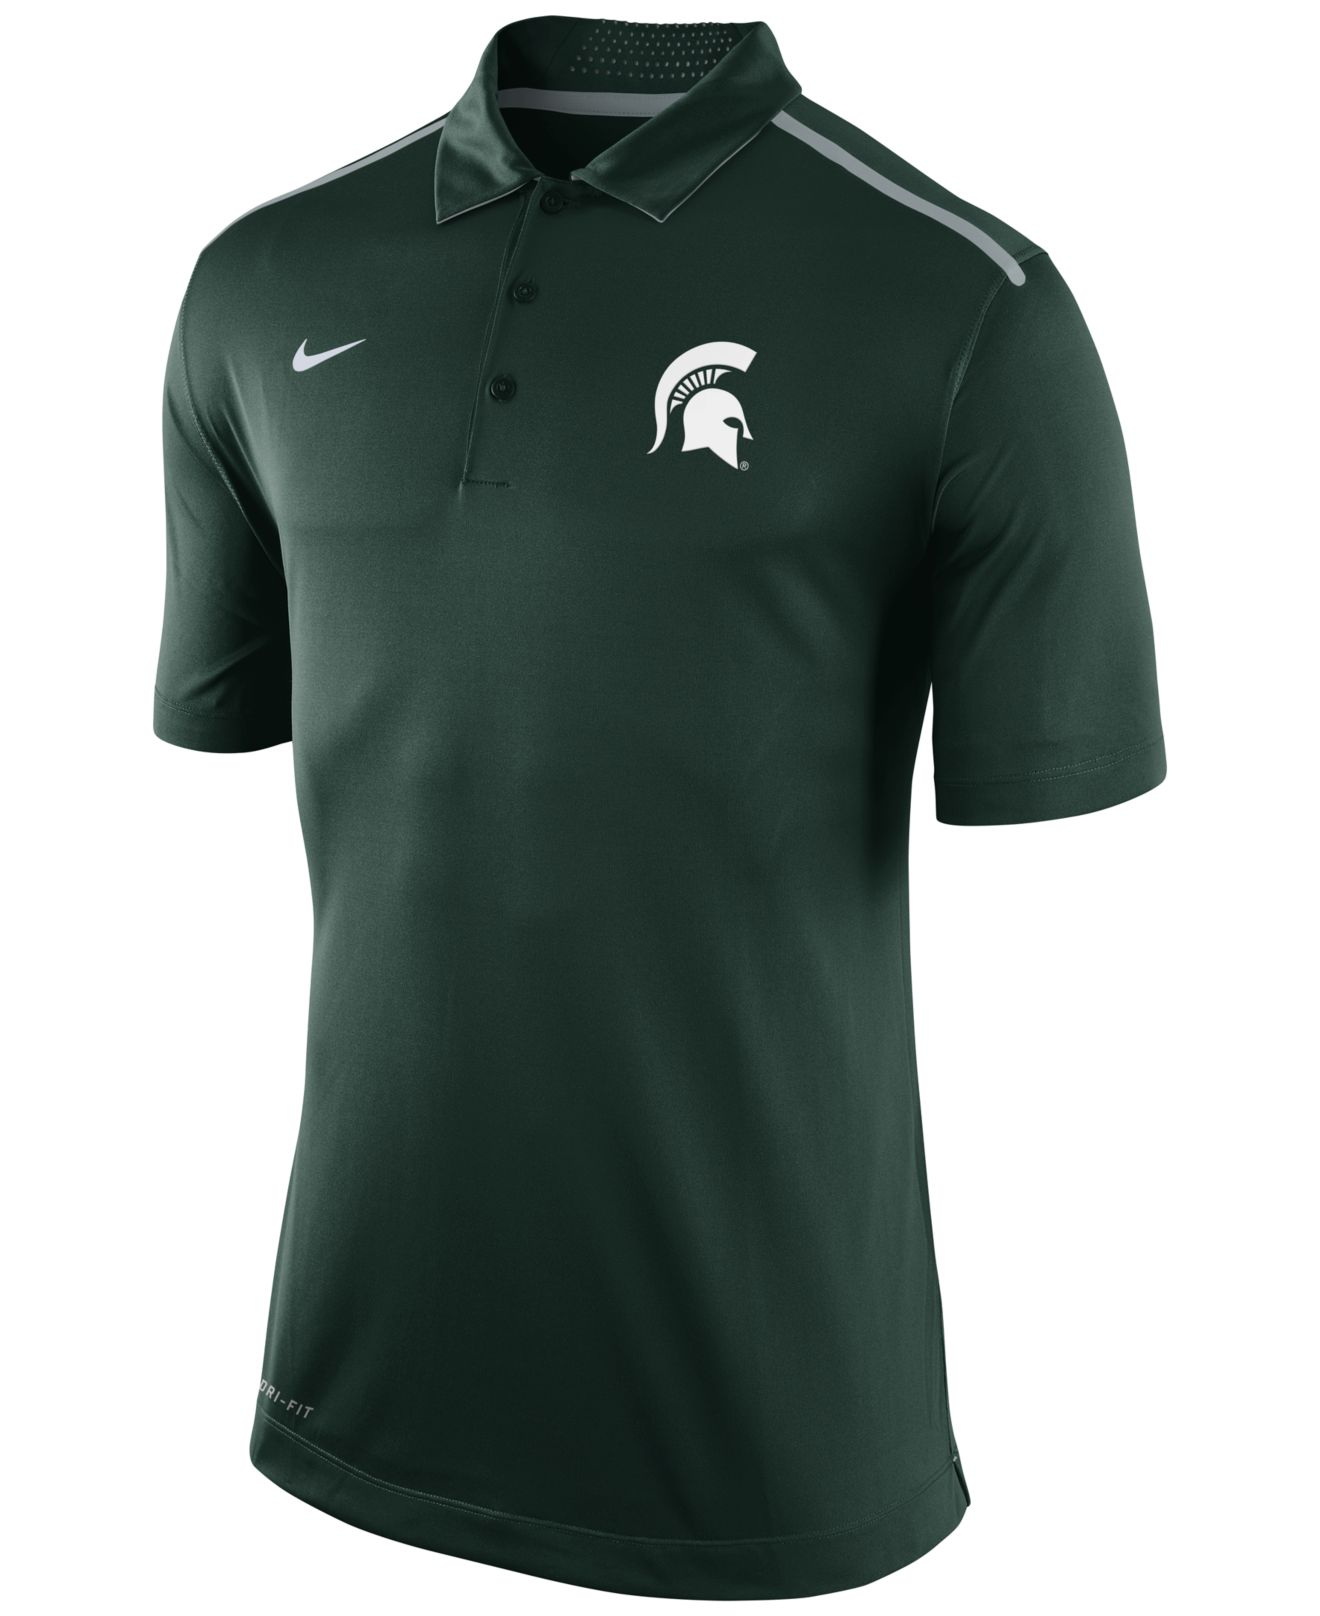 Lyst - Nike Men's Michigan State Spartans Elite Coaches Polo Shirt in ...